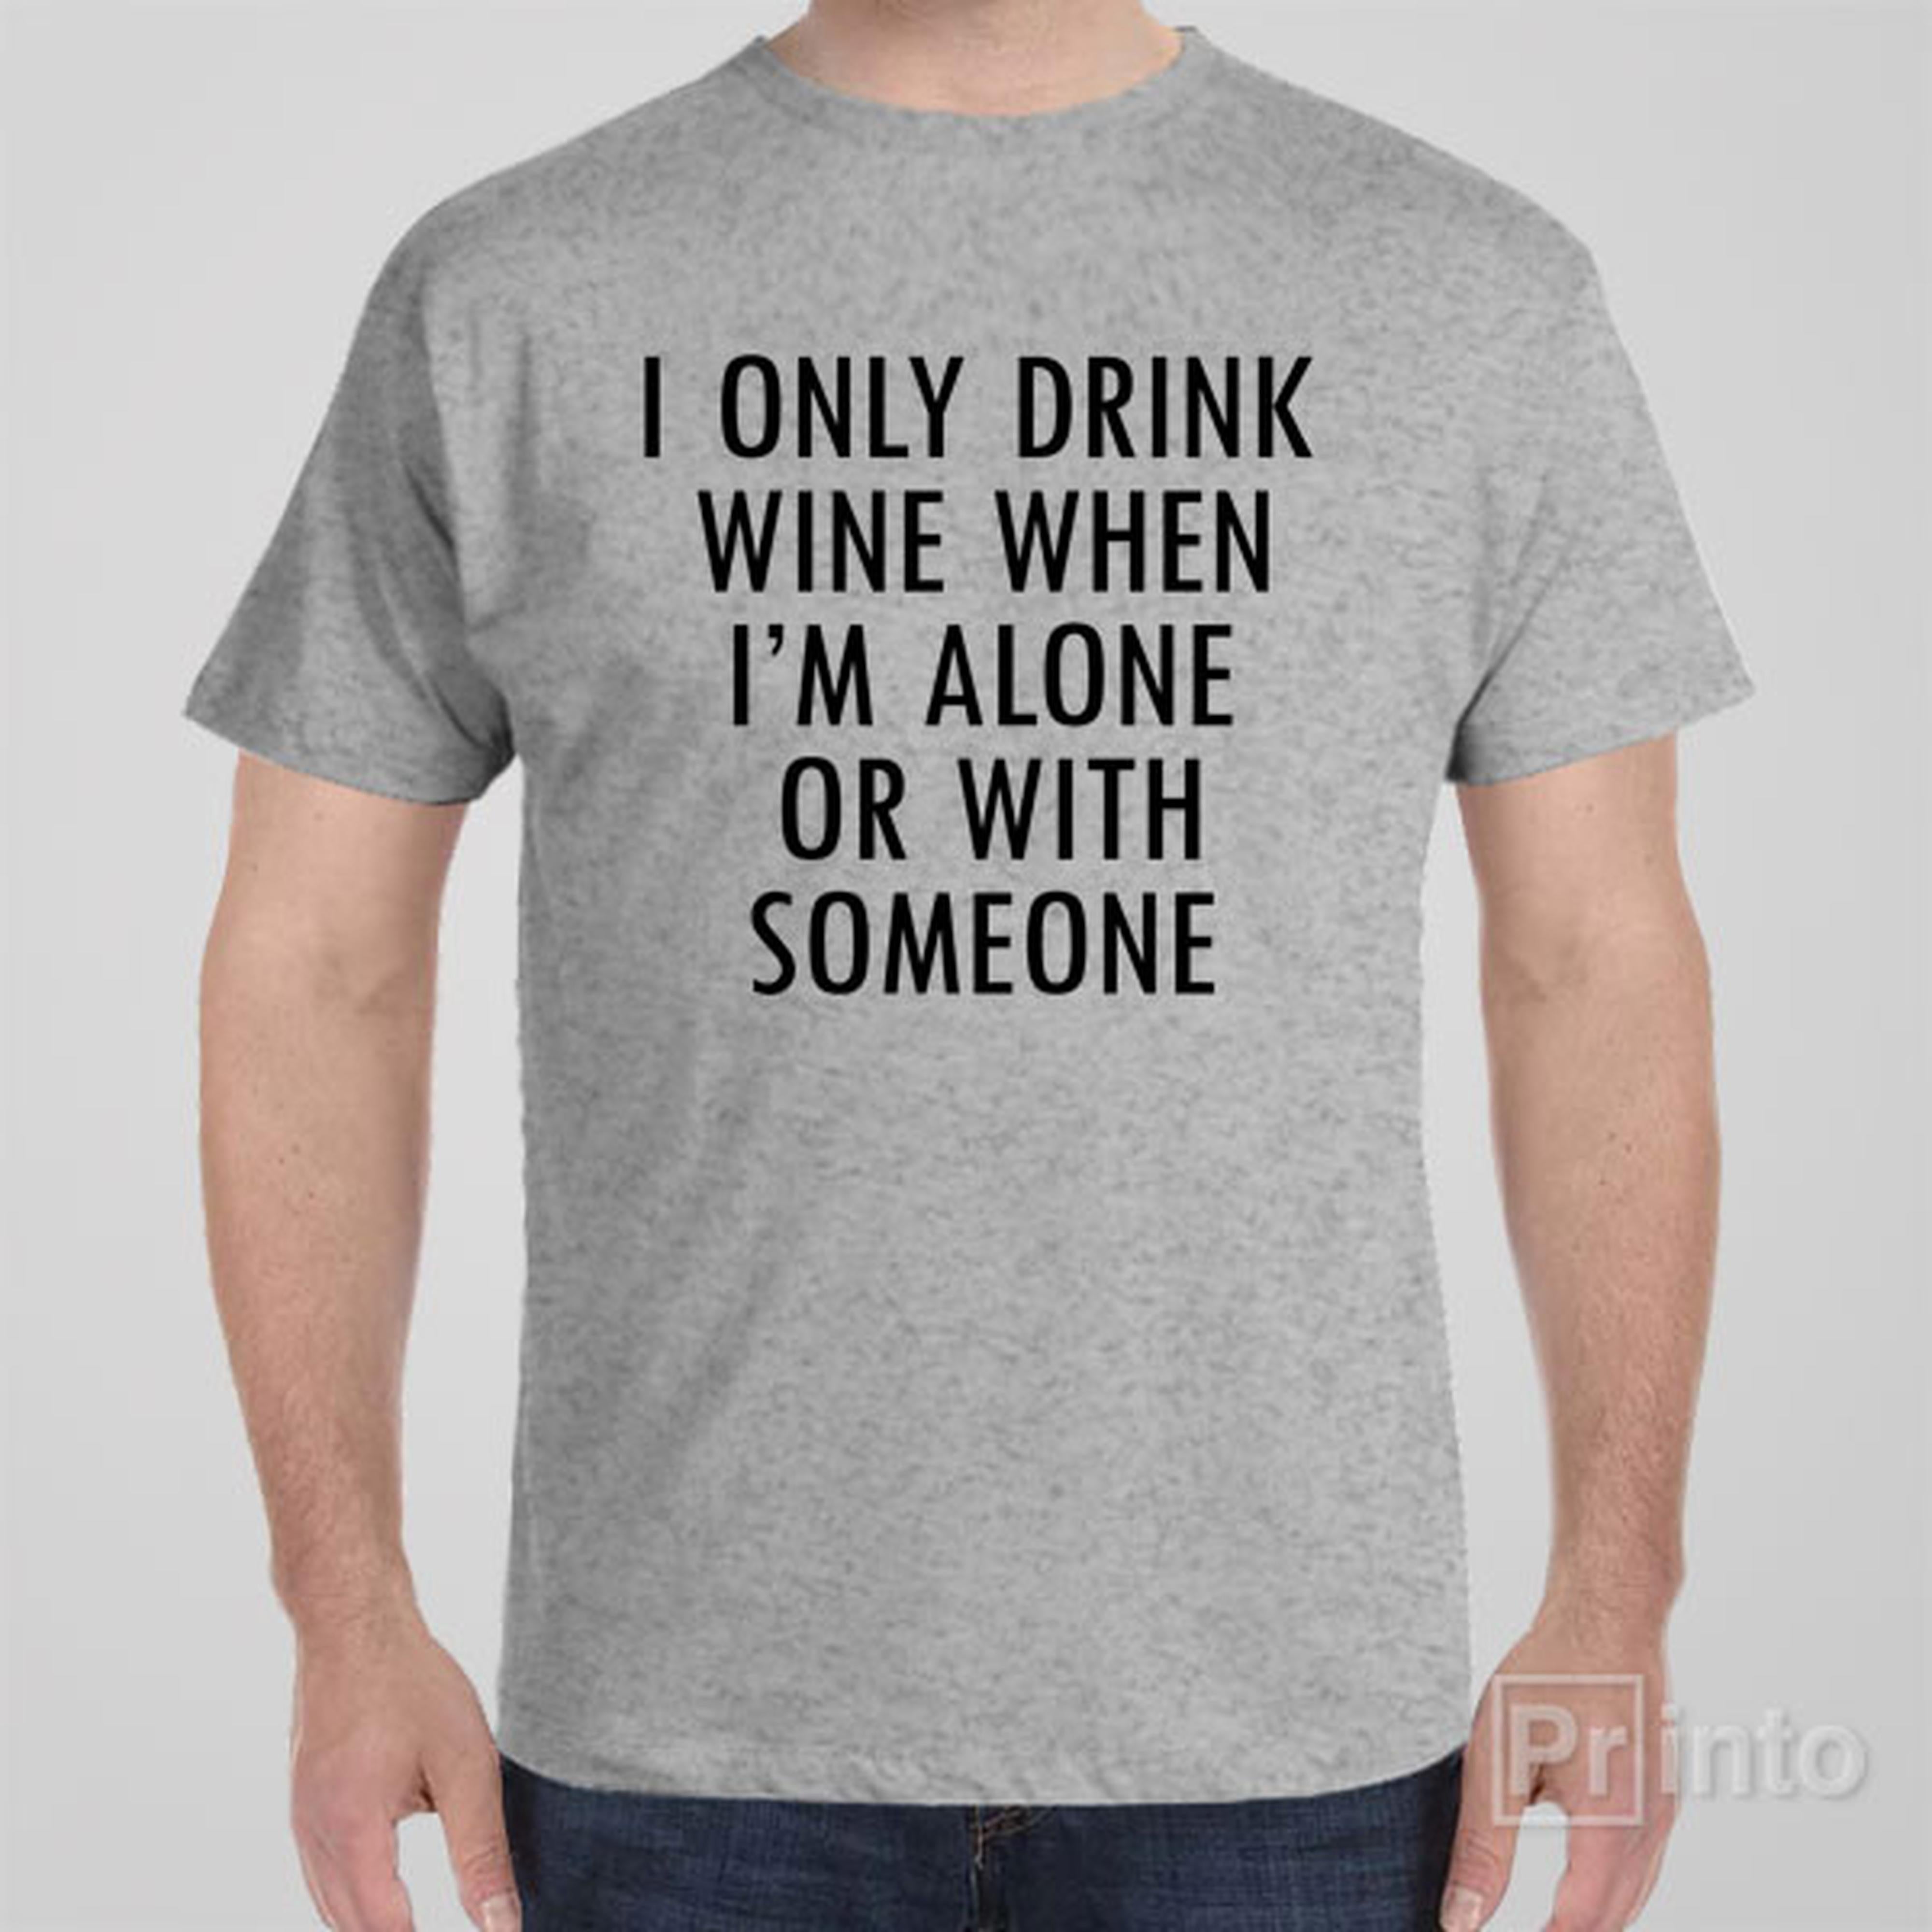 i-only-drink-when-alone-t-shirt